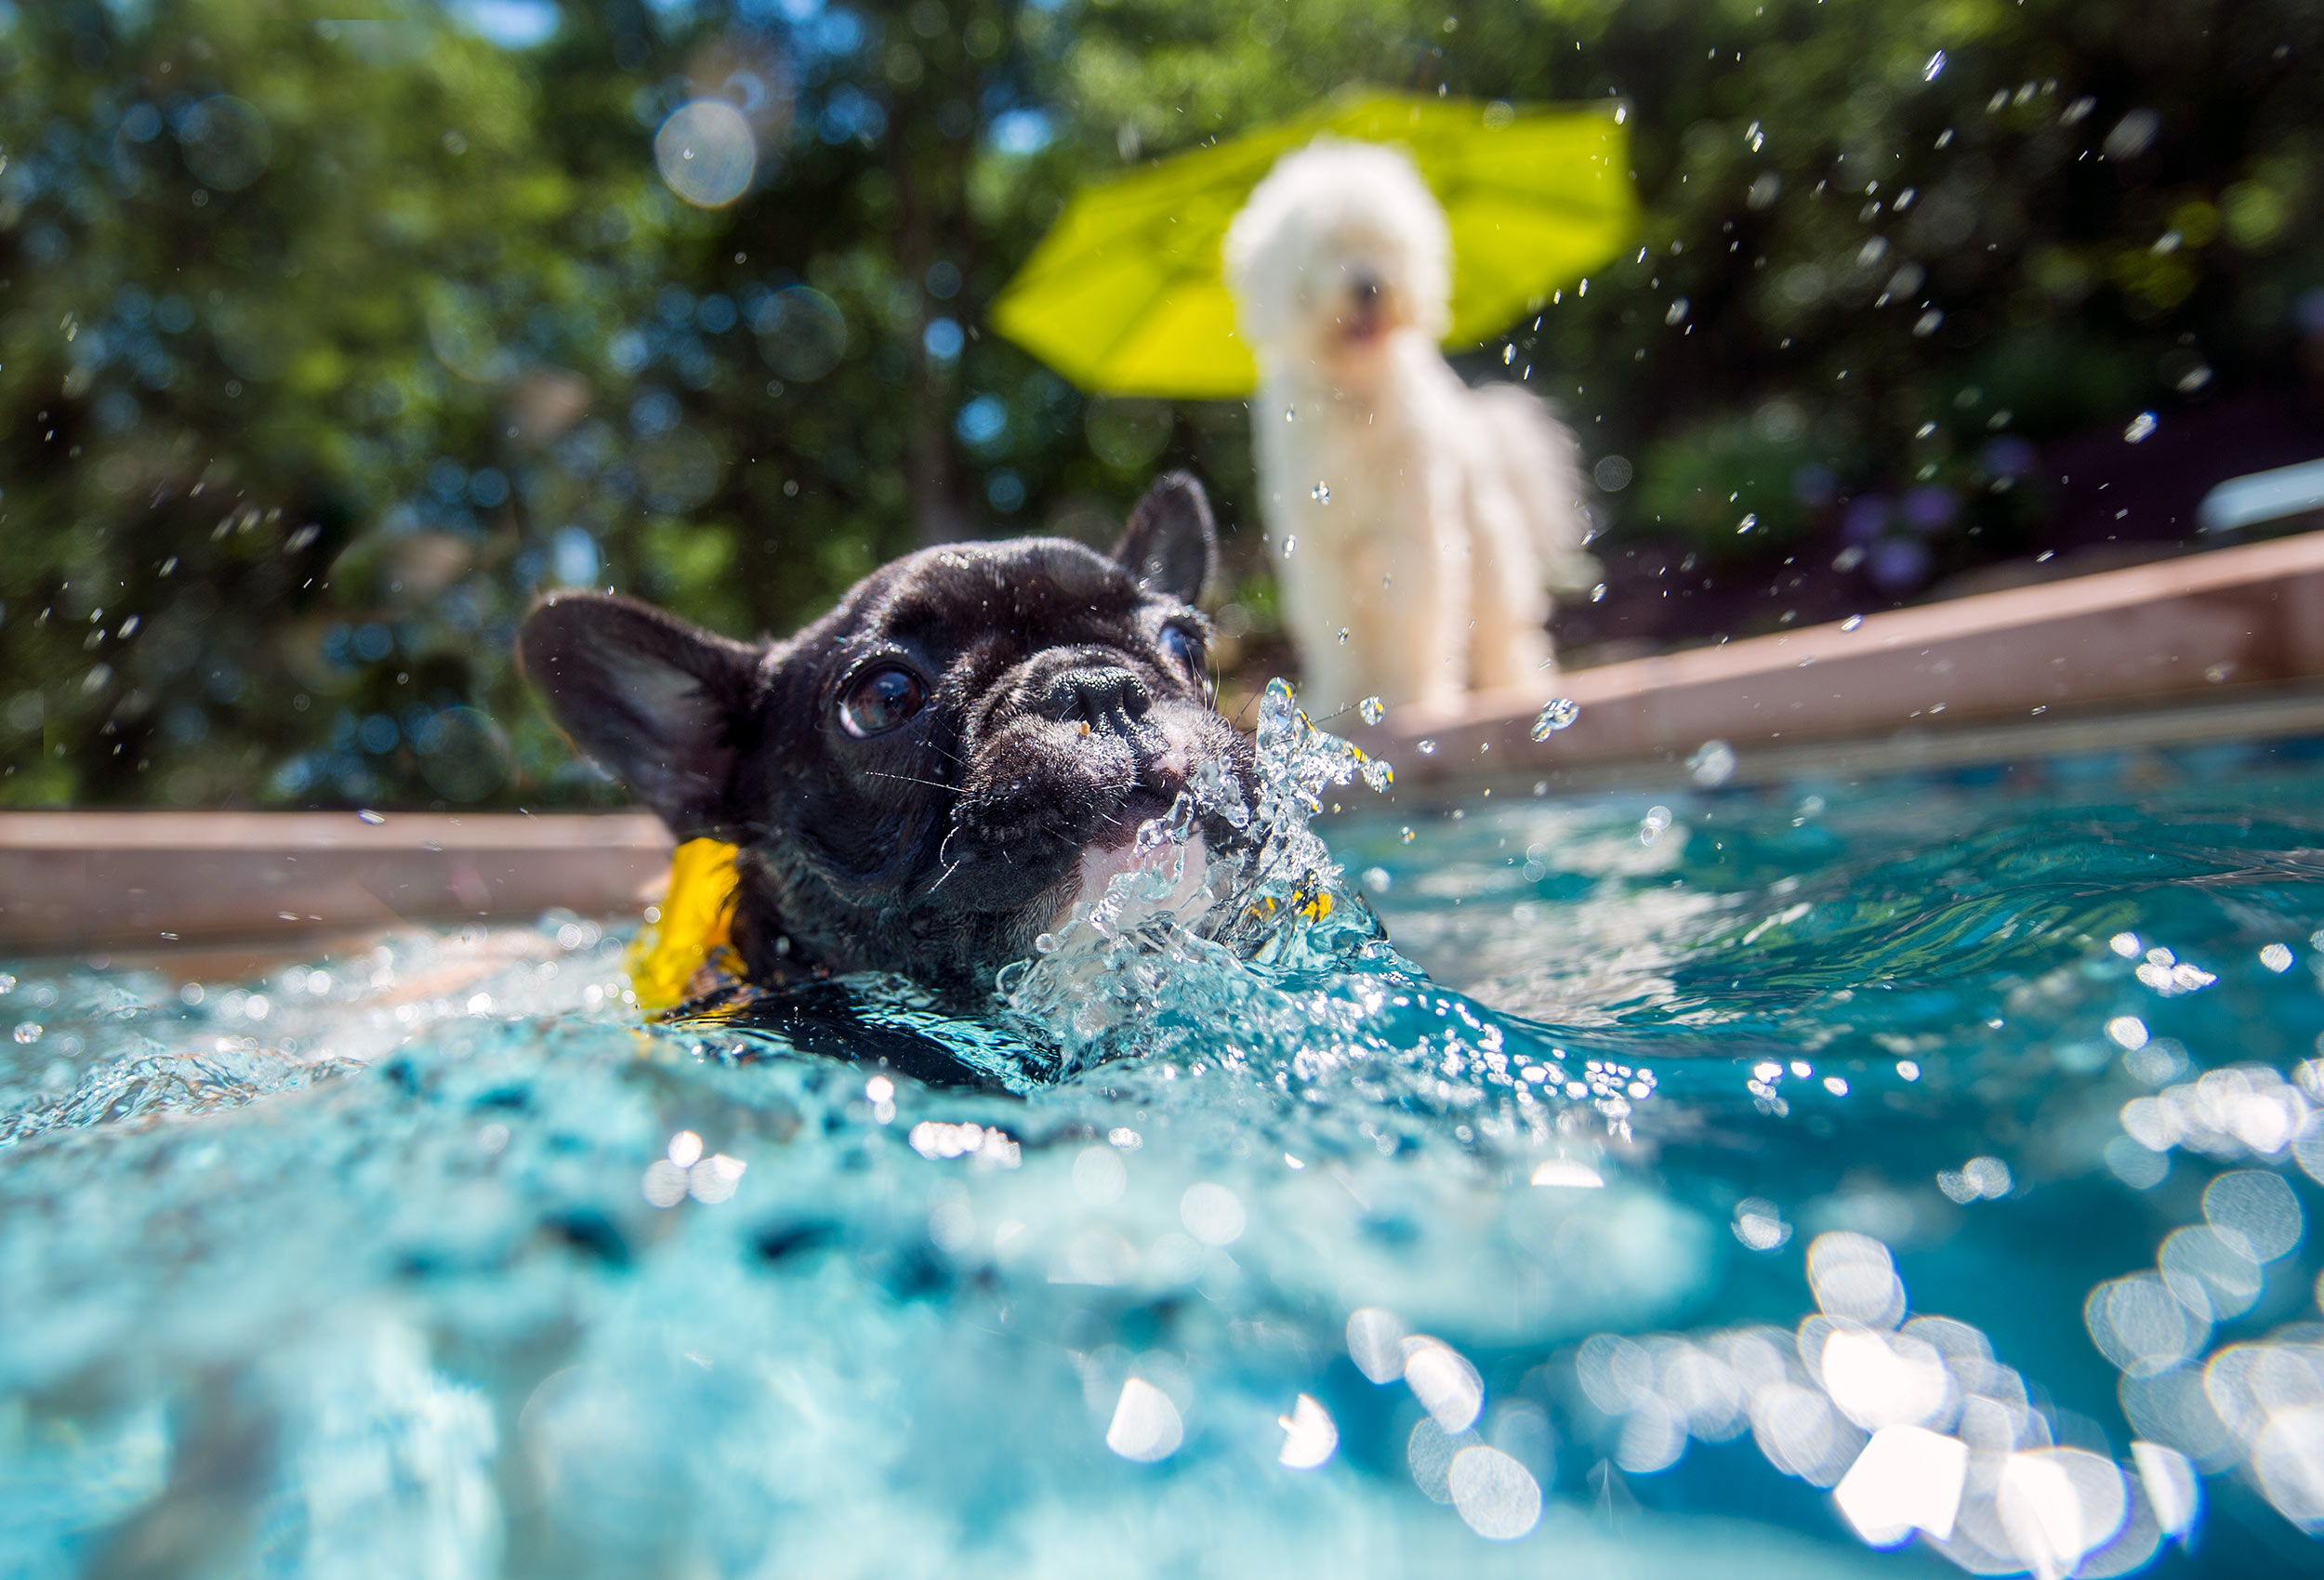 Black French Bulldog swims in pool while white dog looks on in background - dog lifestyle advertising photography